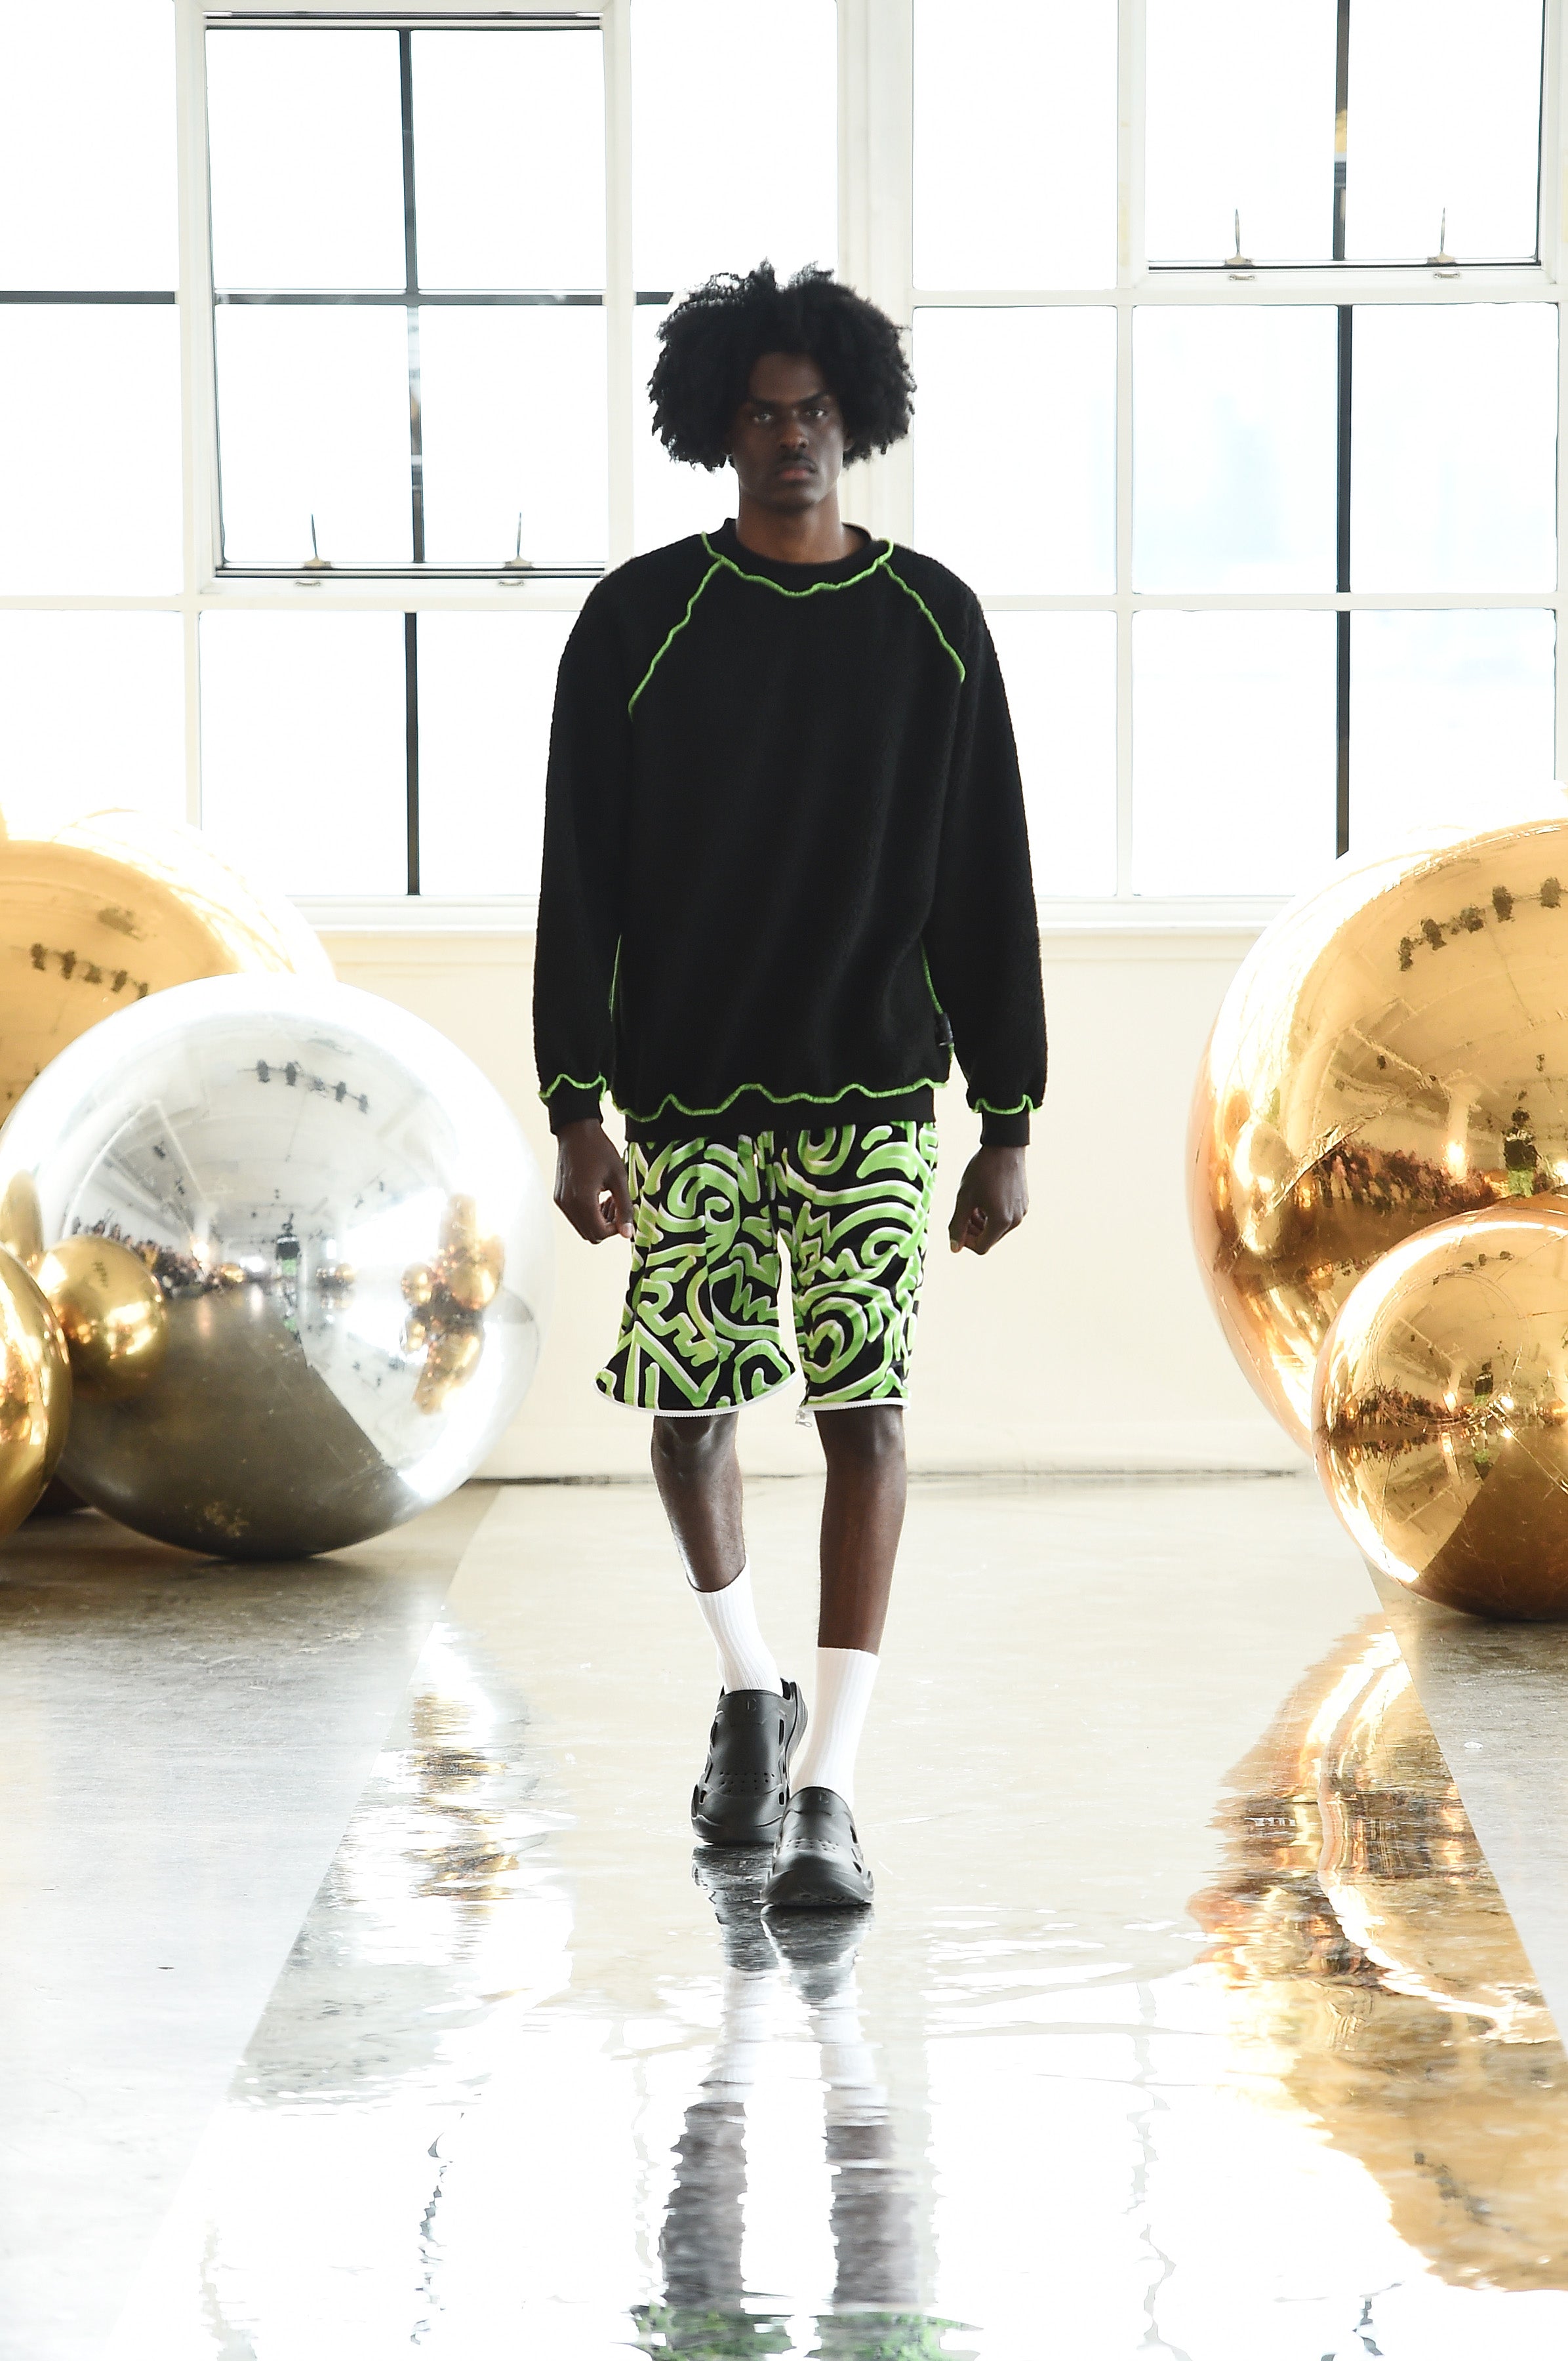 NYC model Daniel walks the Catwalk for NYFW FW/24  at Canoe Studios in Manhattan wearing Bellisa X unisex streetwear featured in Fashion Week Online. Outfit: Black sherpa sweatshirt with white monogram graphics with Green Abstract Velvet Shorts, Socks and Champion Sandals